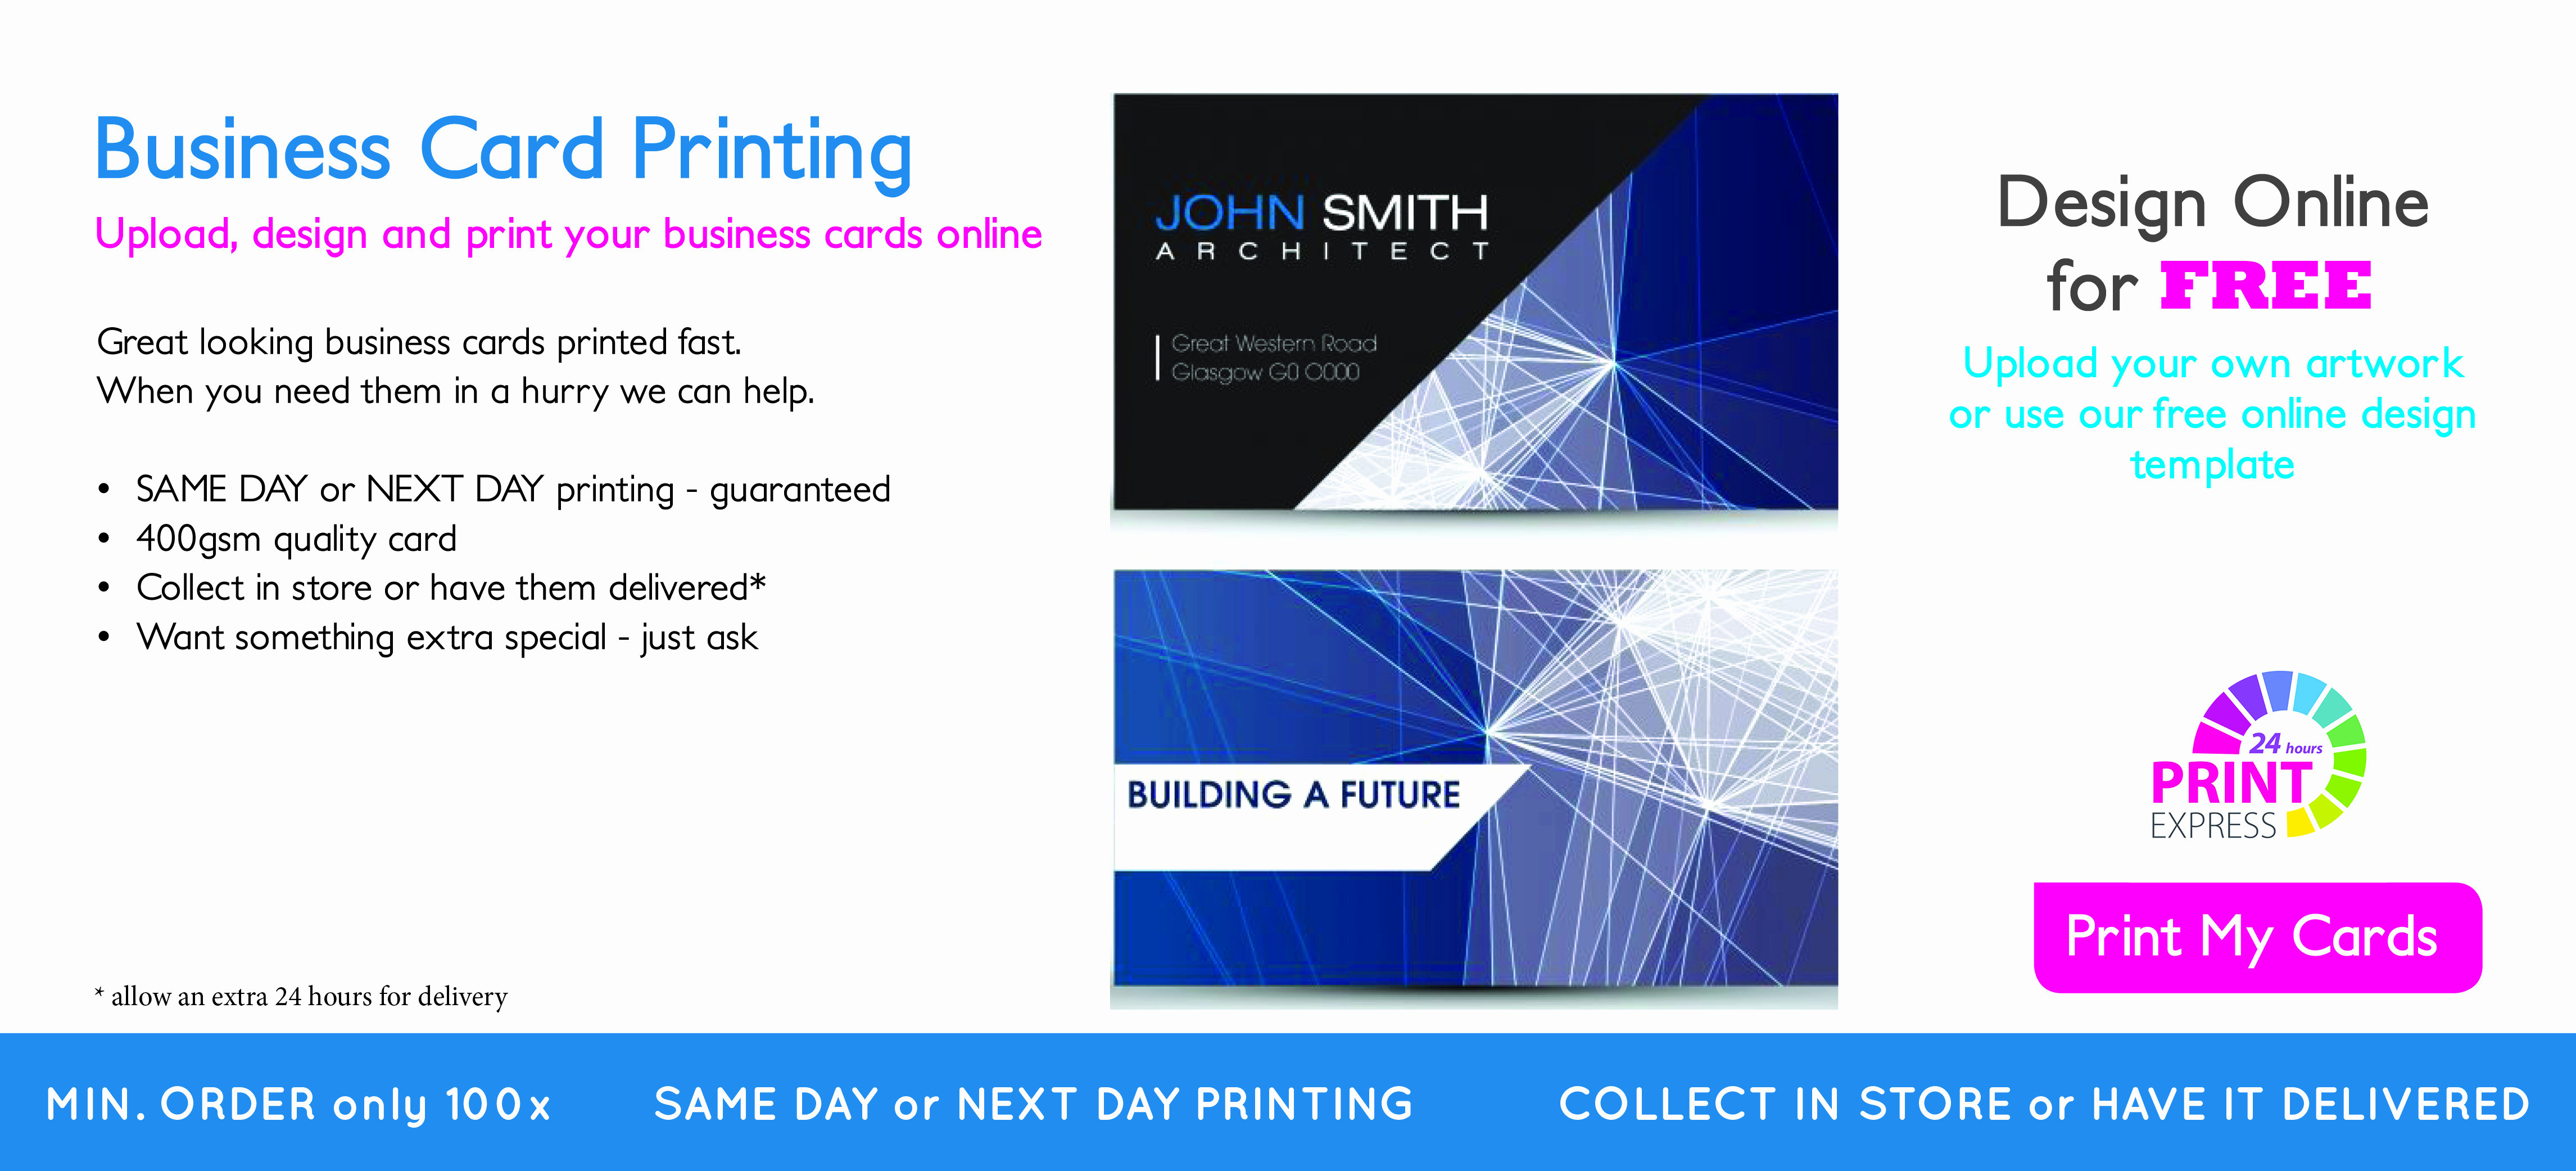 Local Business Card Printing Free Small Engine Repair Of Free Business Cards Templates Online